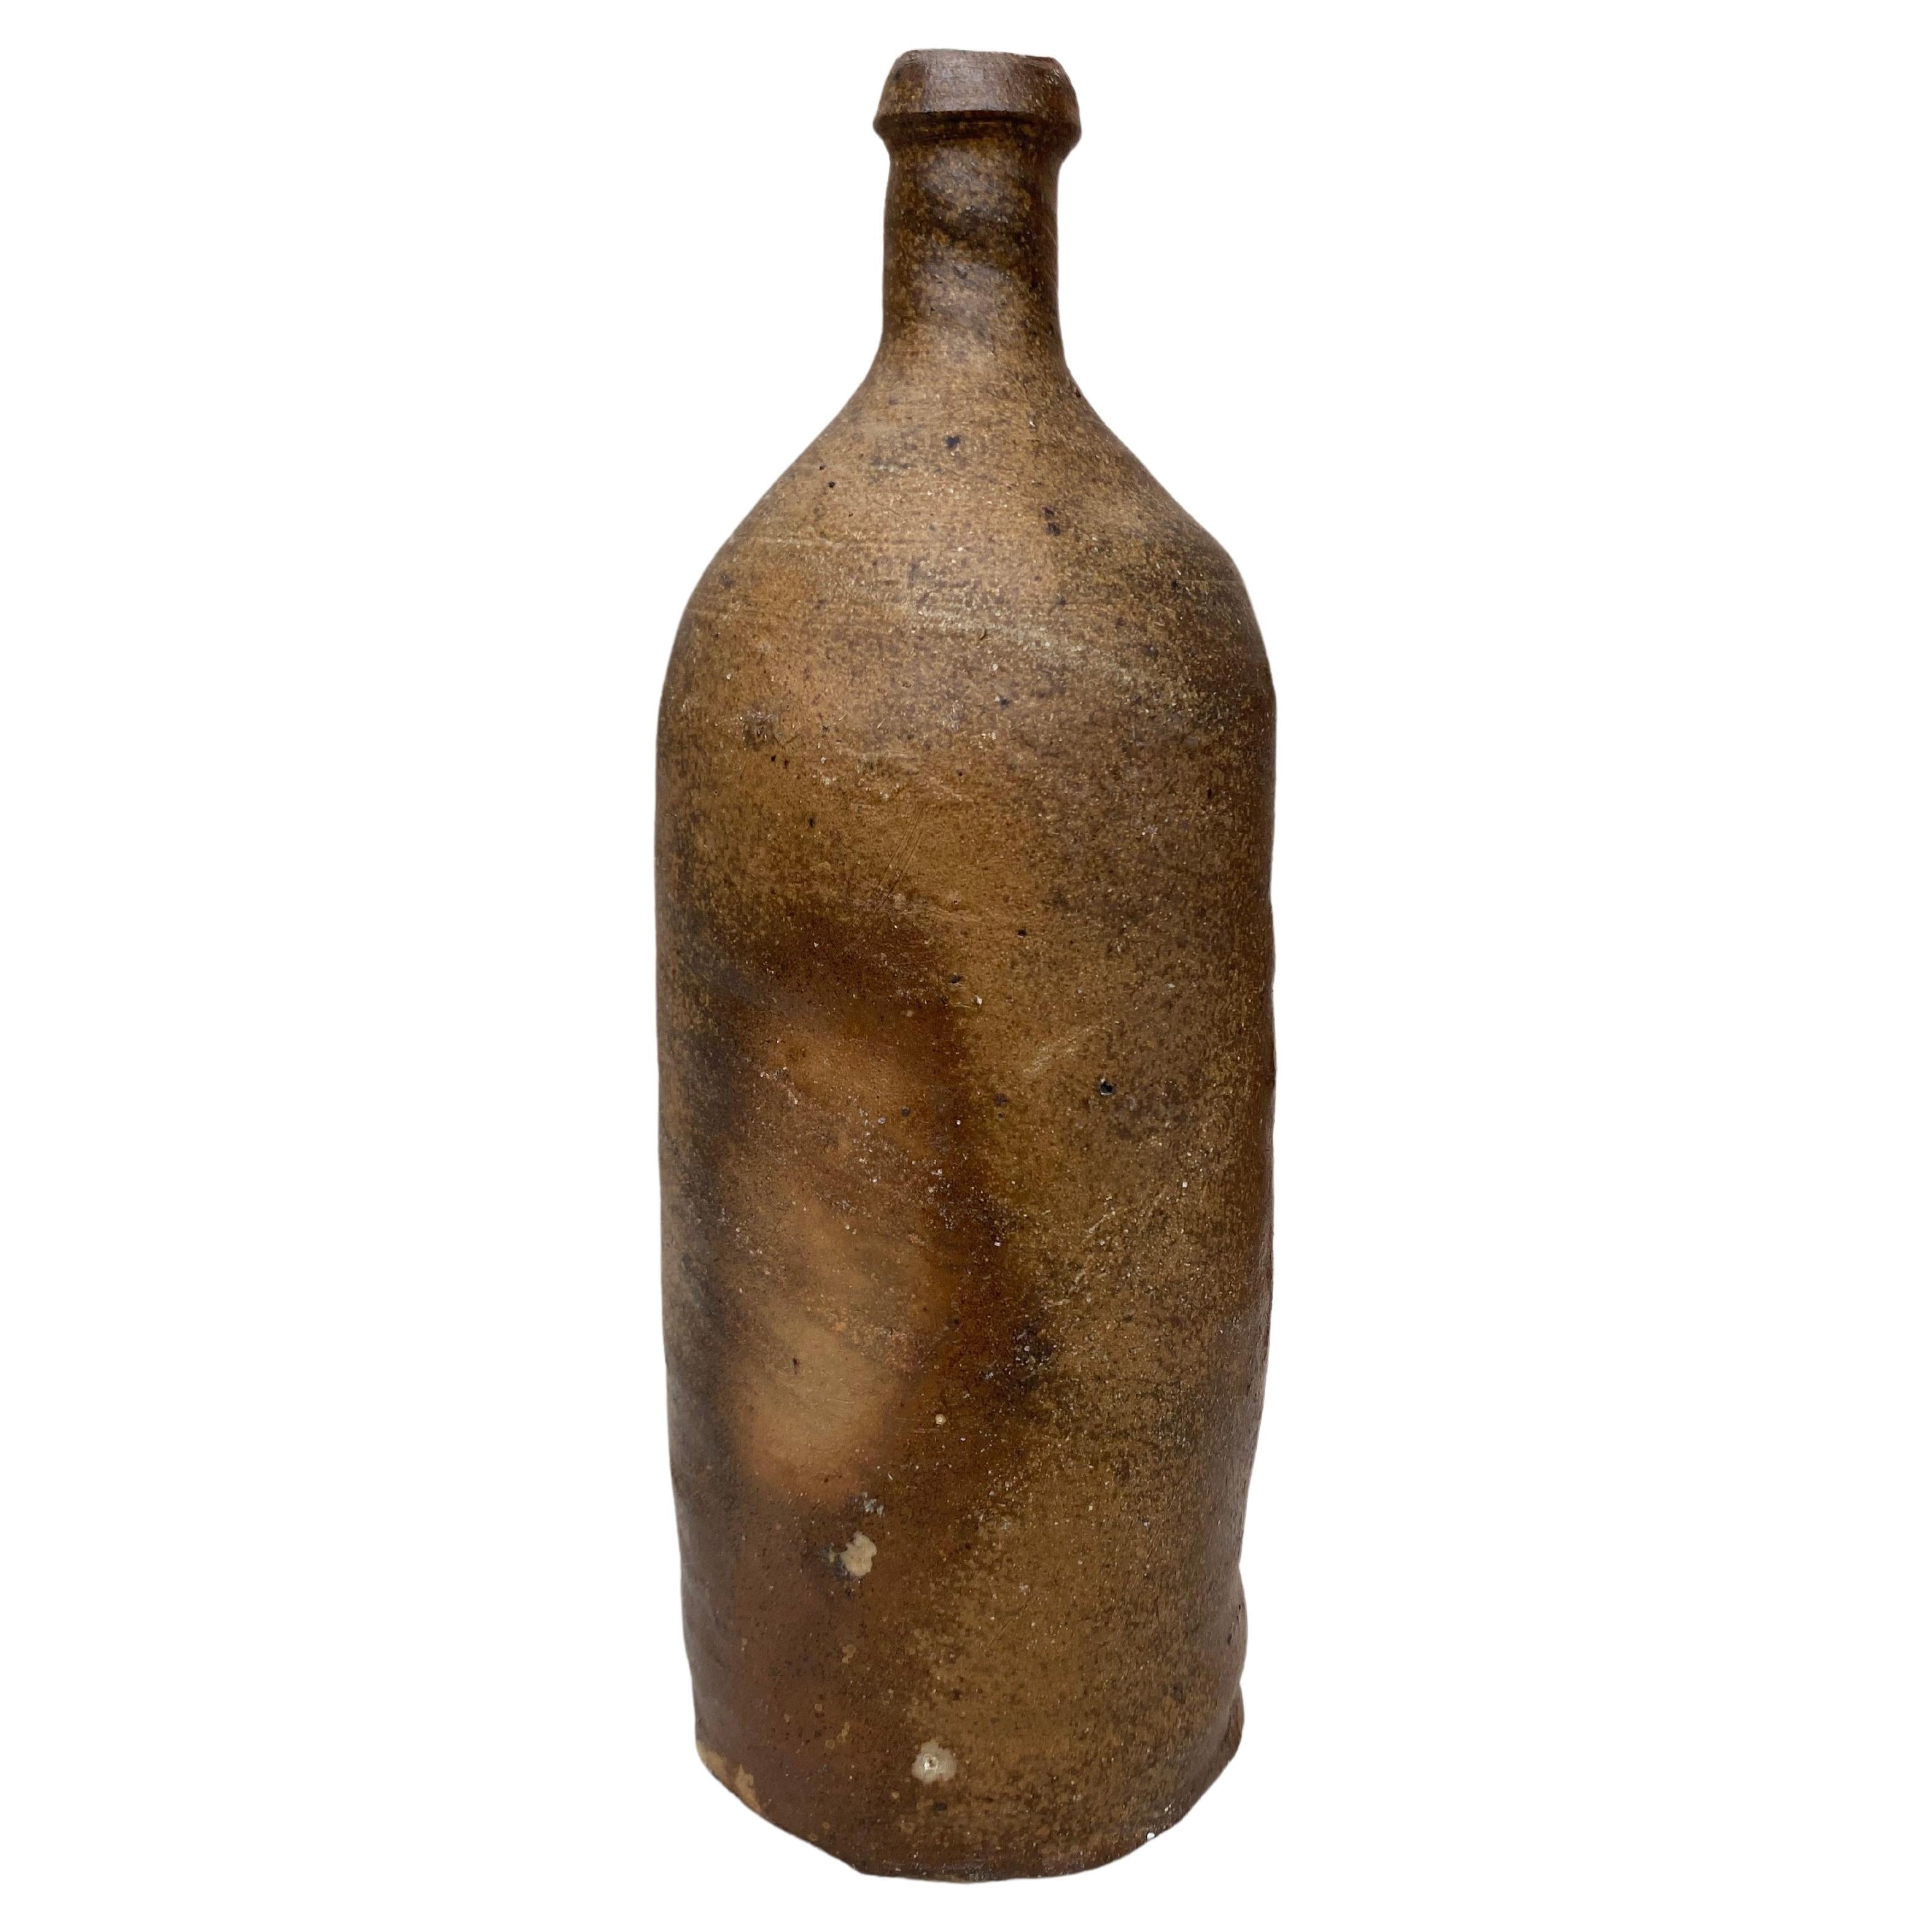 French pottery cider bottle from Normandy, end of 19th century.
13 bottles available, sold separately.
Different sizes.